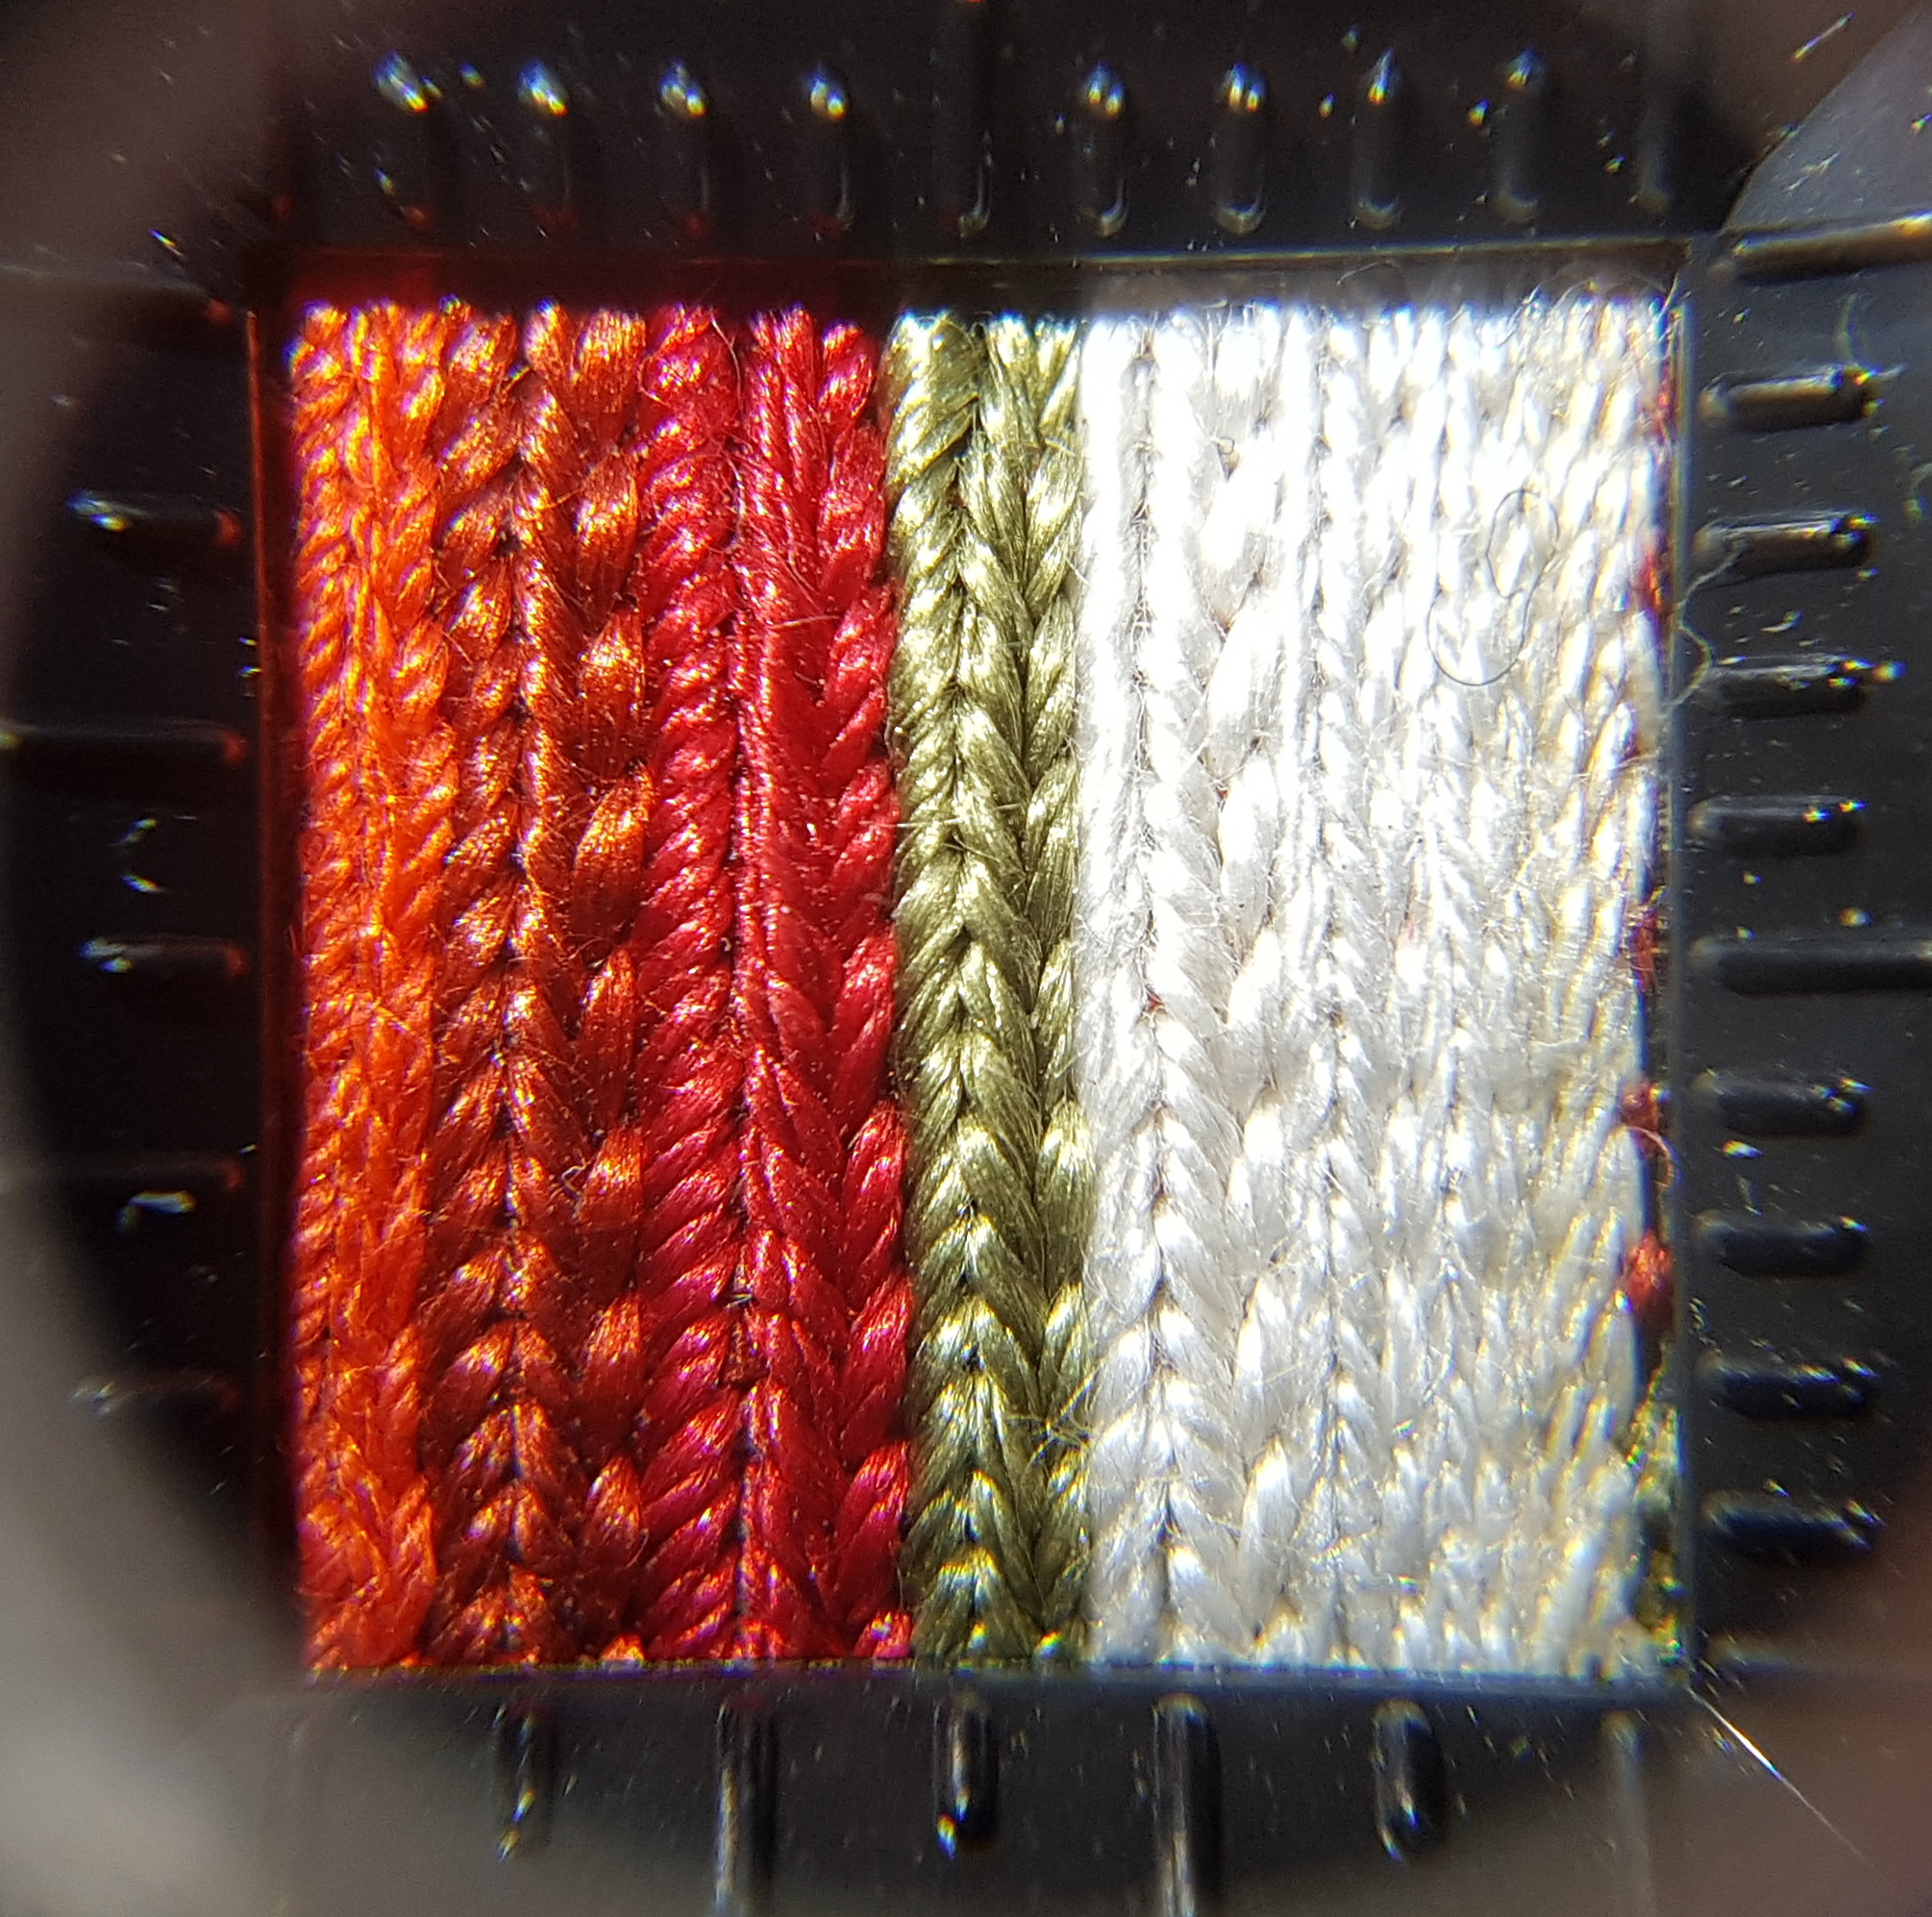 Test weave with different silks